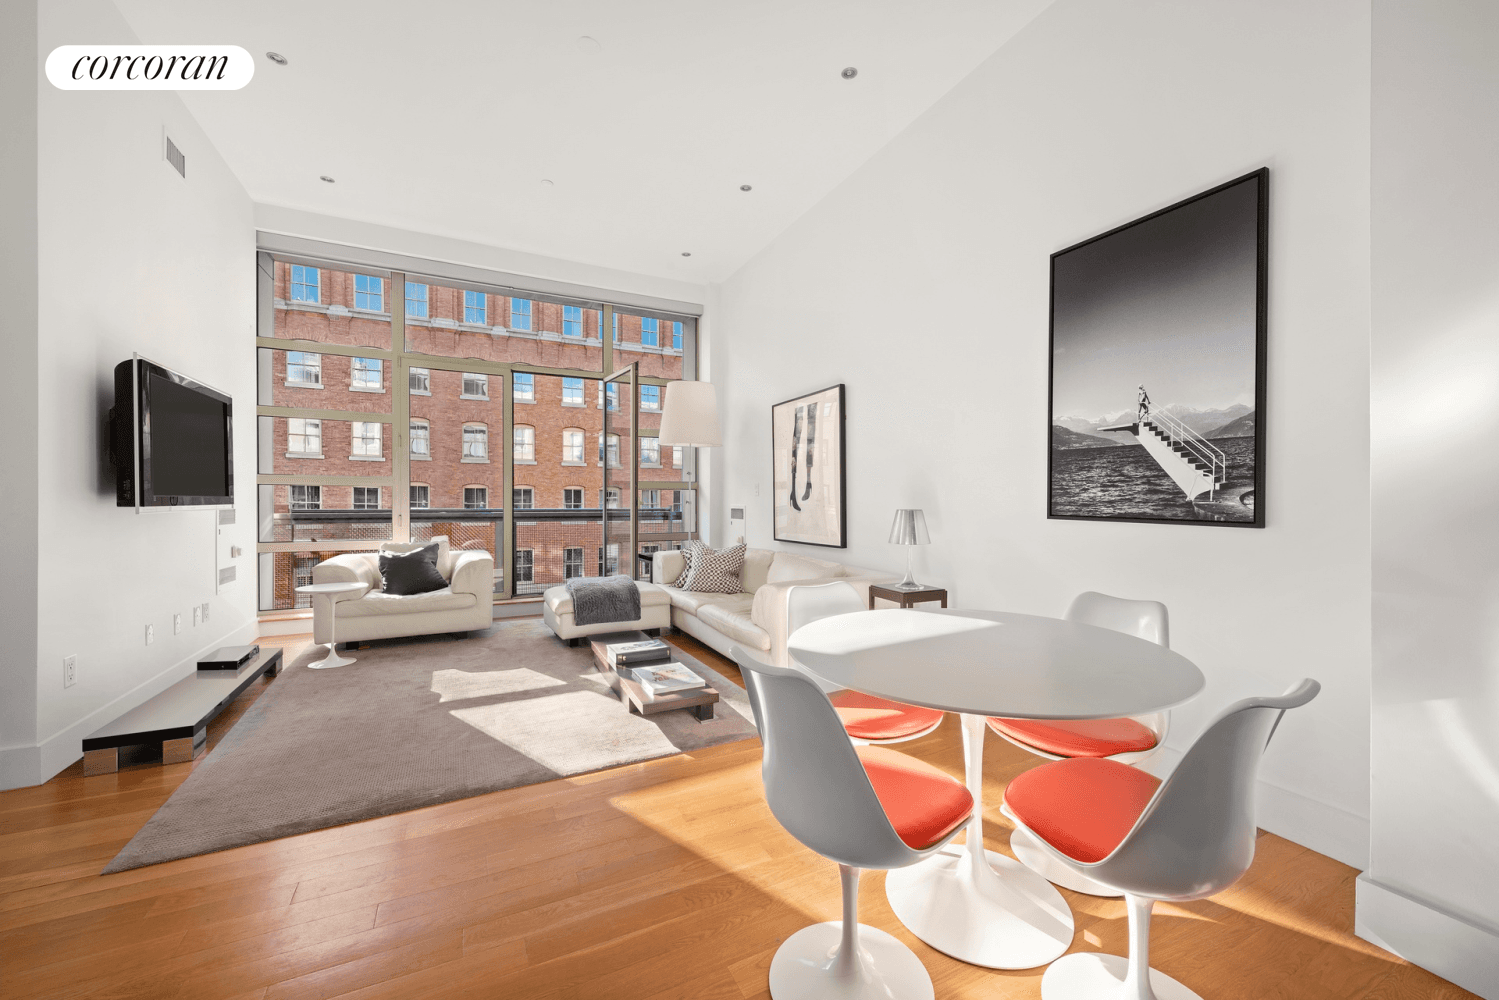 This two bedroom, two bathroom Tribeca loft shines with chic contemporary interiors and glorious natural light in a boutique condominium nestled at the intersection of Tribeca, Hudson Square and SoHo.